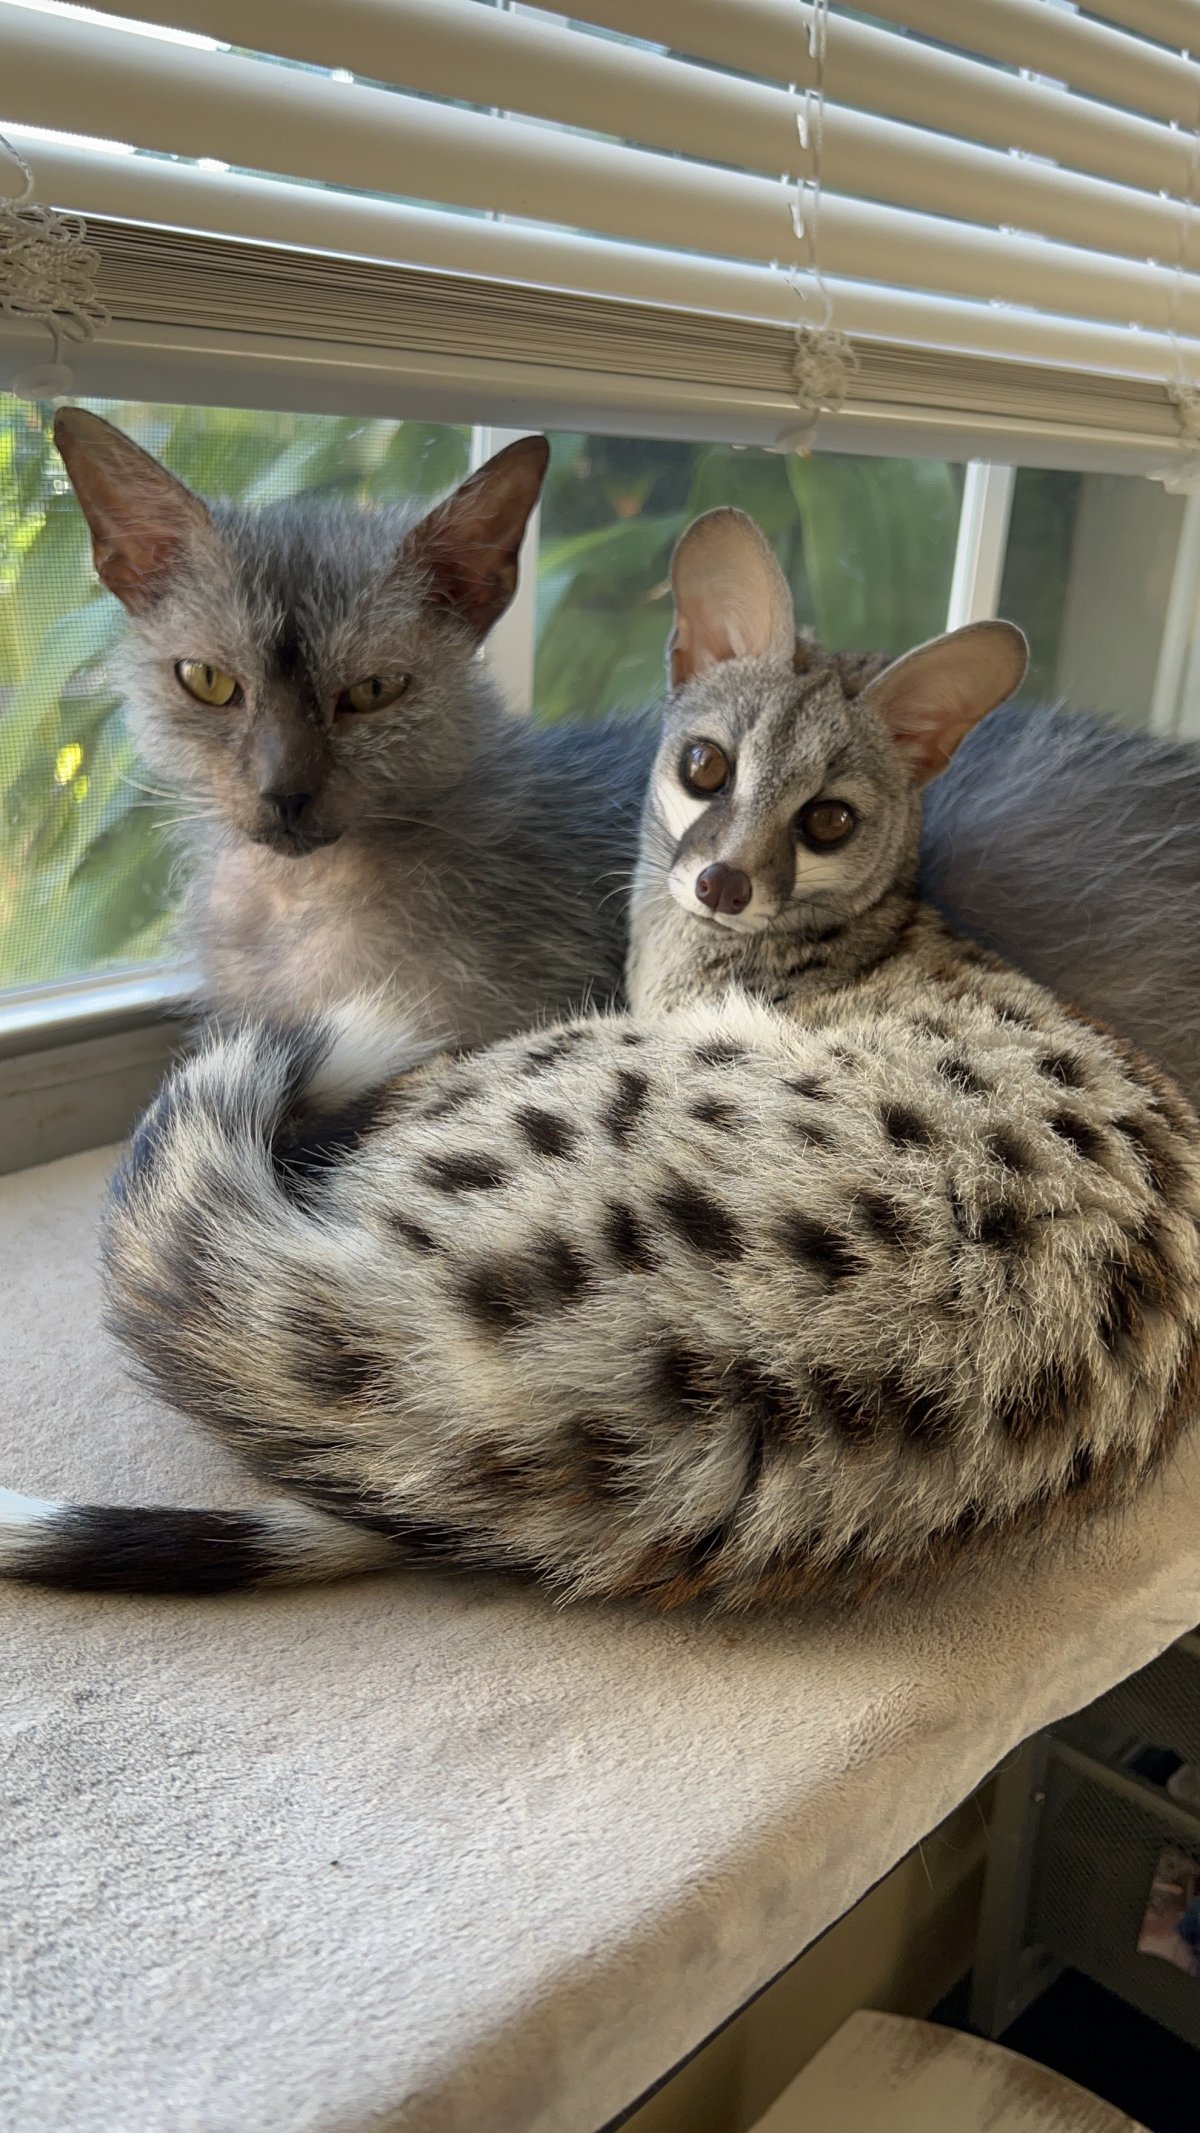  Norman the genet with a cat.